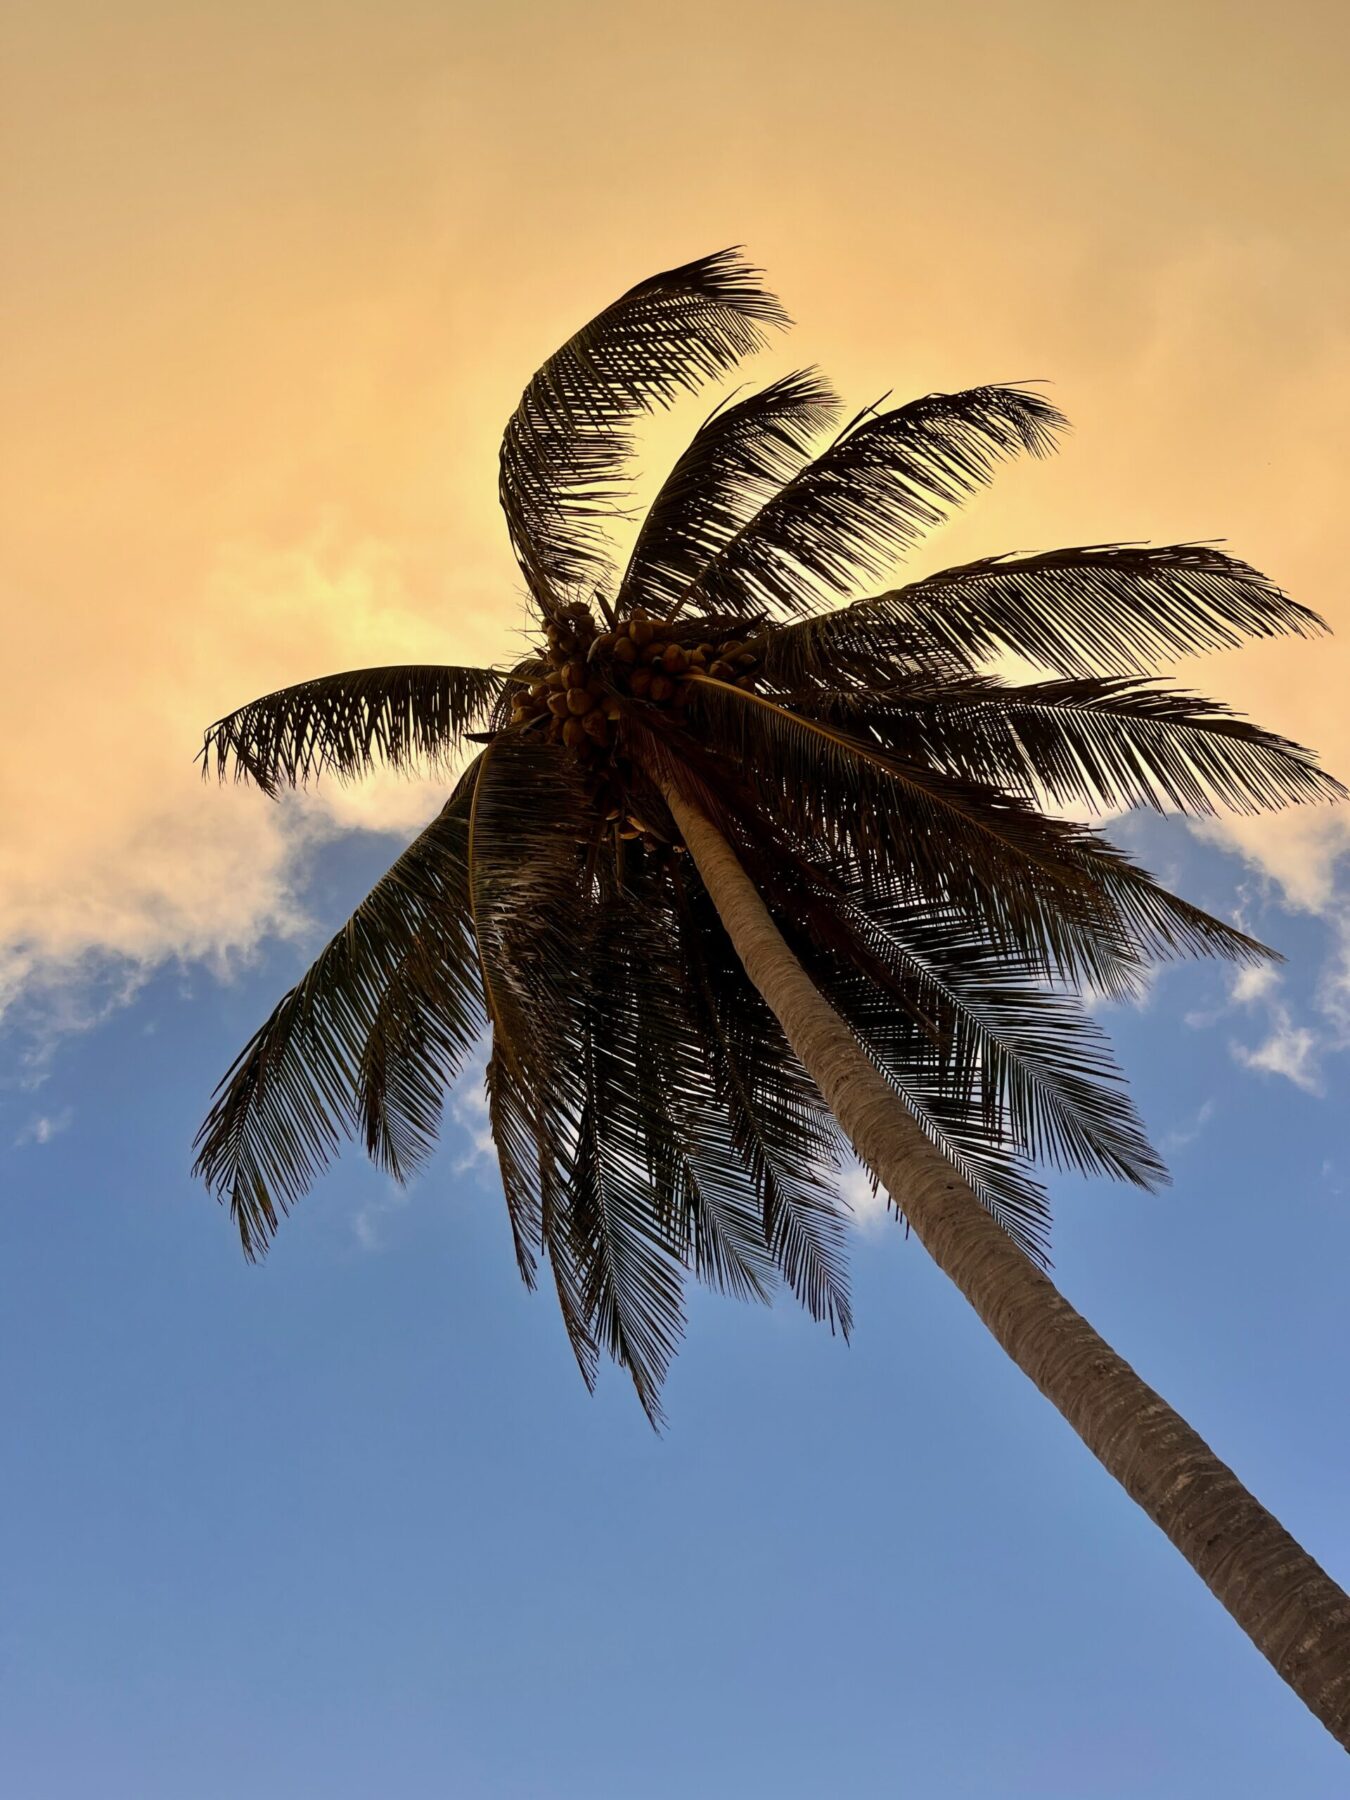 a palm tree over a sunset sky in Tulum